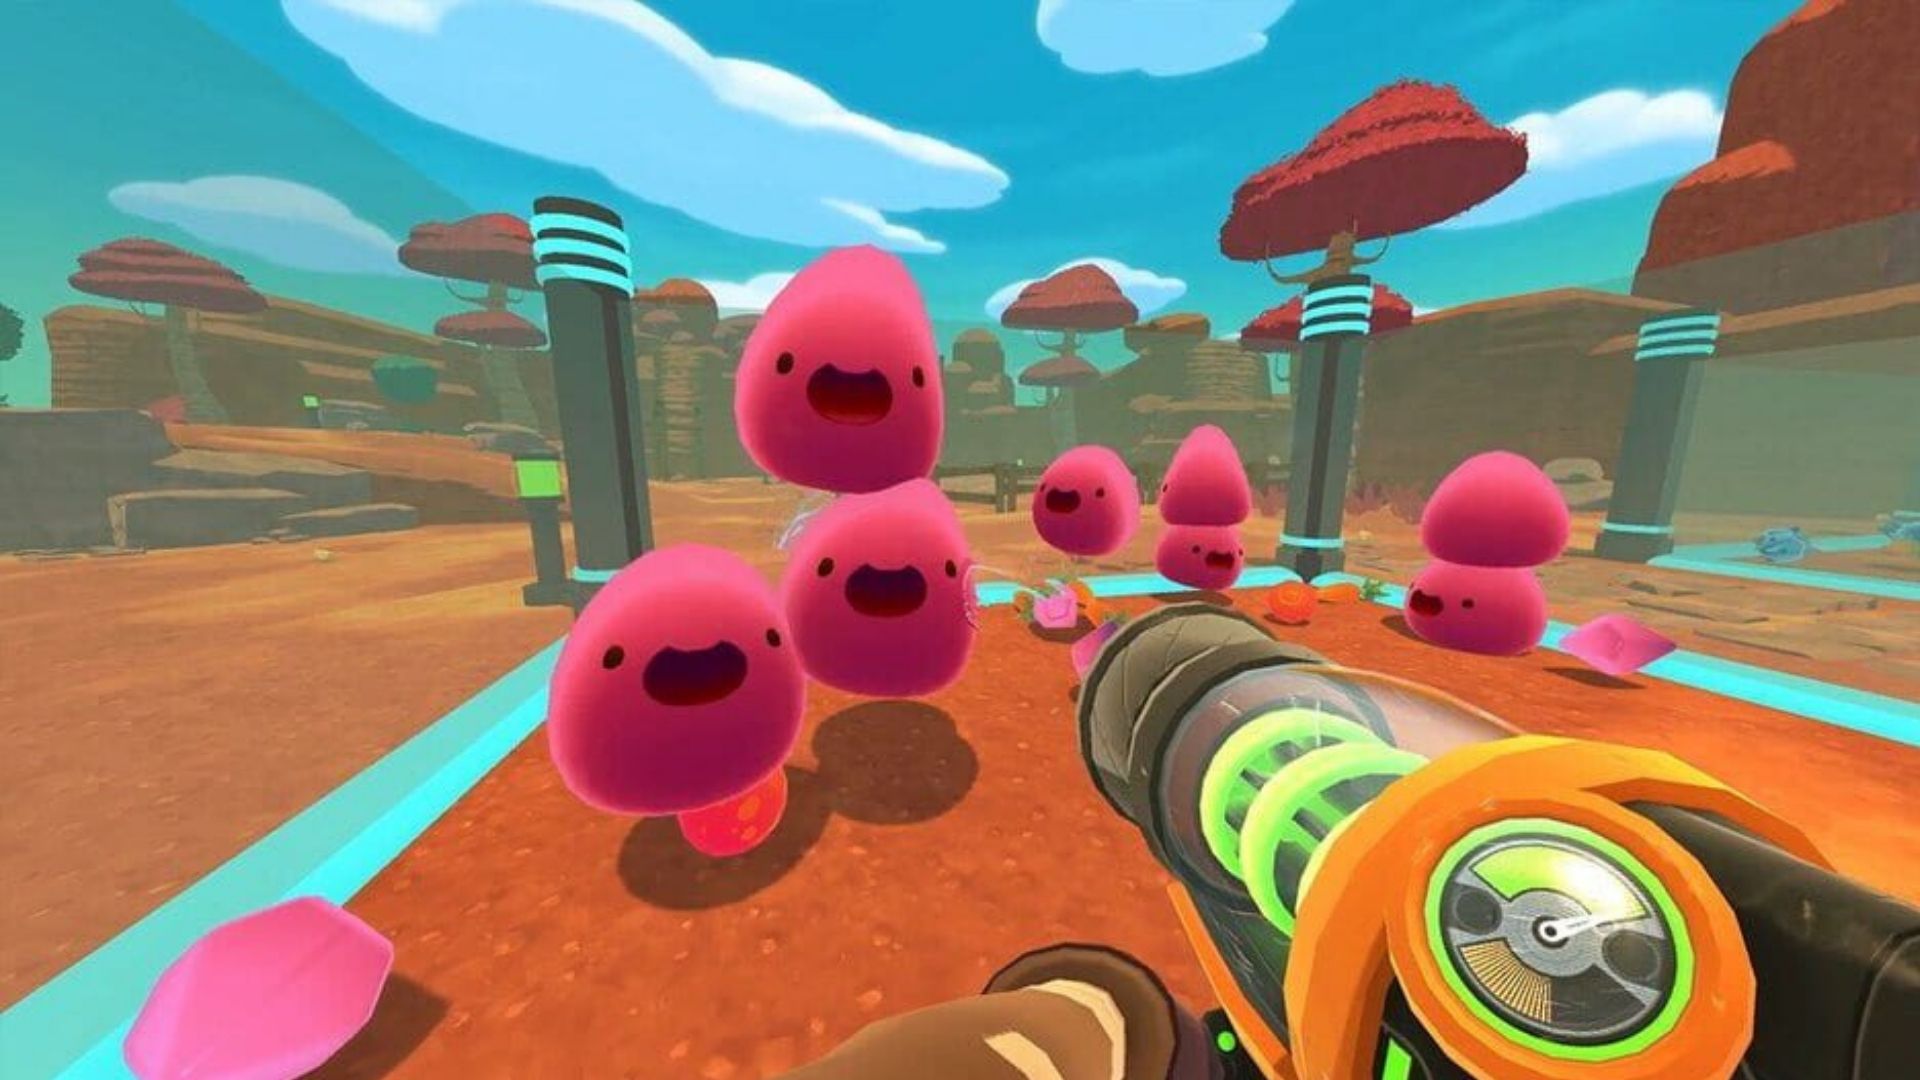 A screenshot from Slime Rancher, a game like Pokémon, featuring various slimes (spherical goo creatures with smiley faces), bouncing around in an electric-fenced pen.